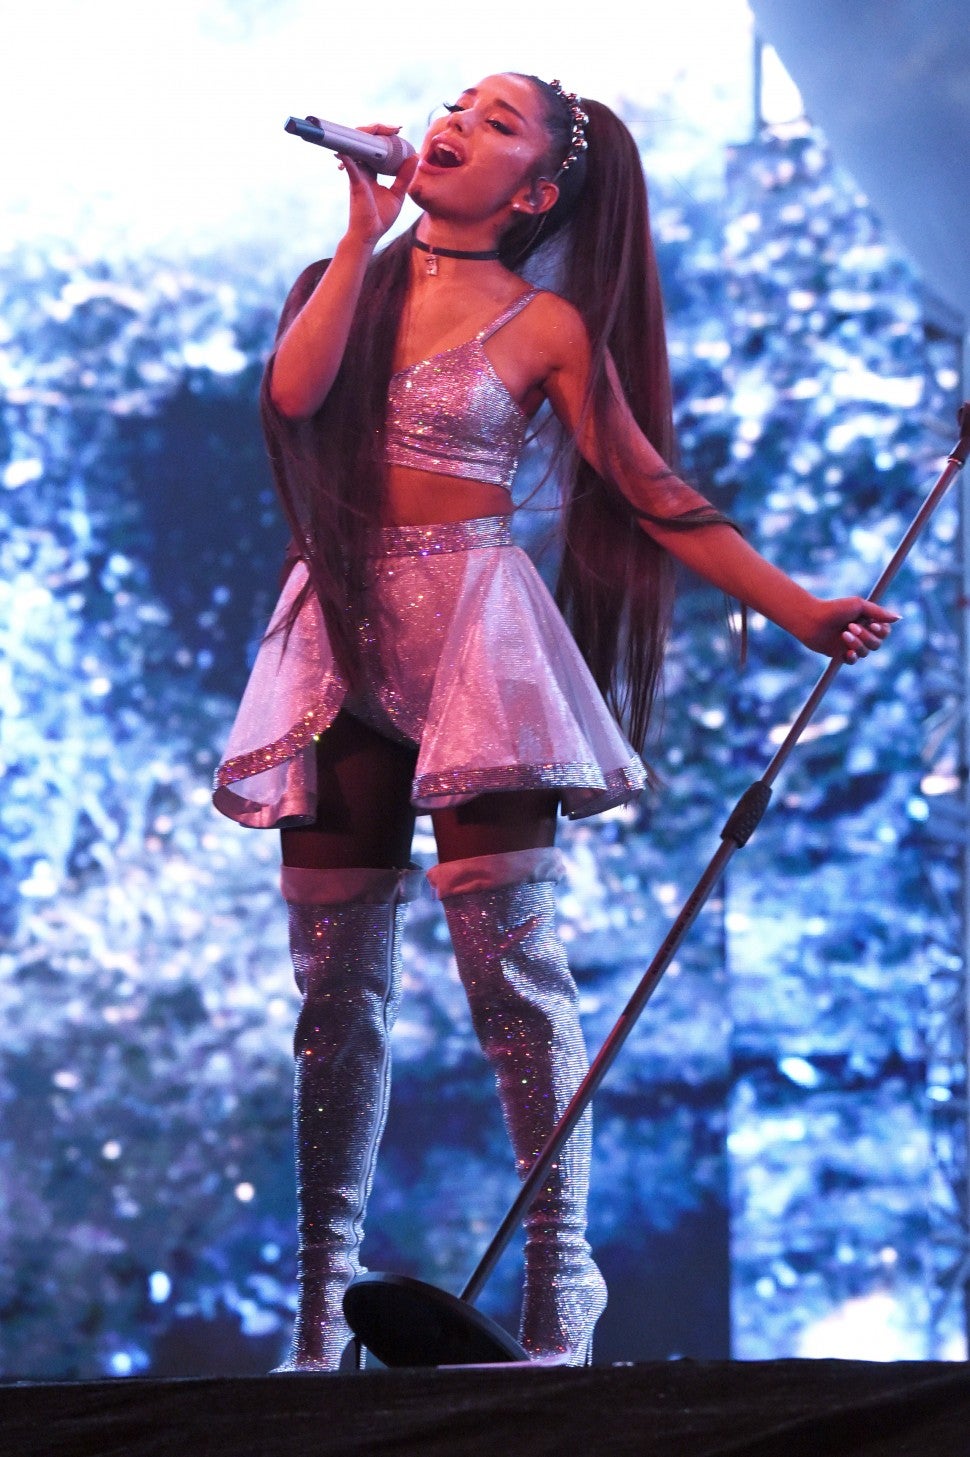 Ariana Grande pink sequin outfit at Coachella